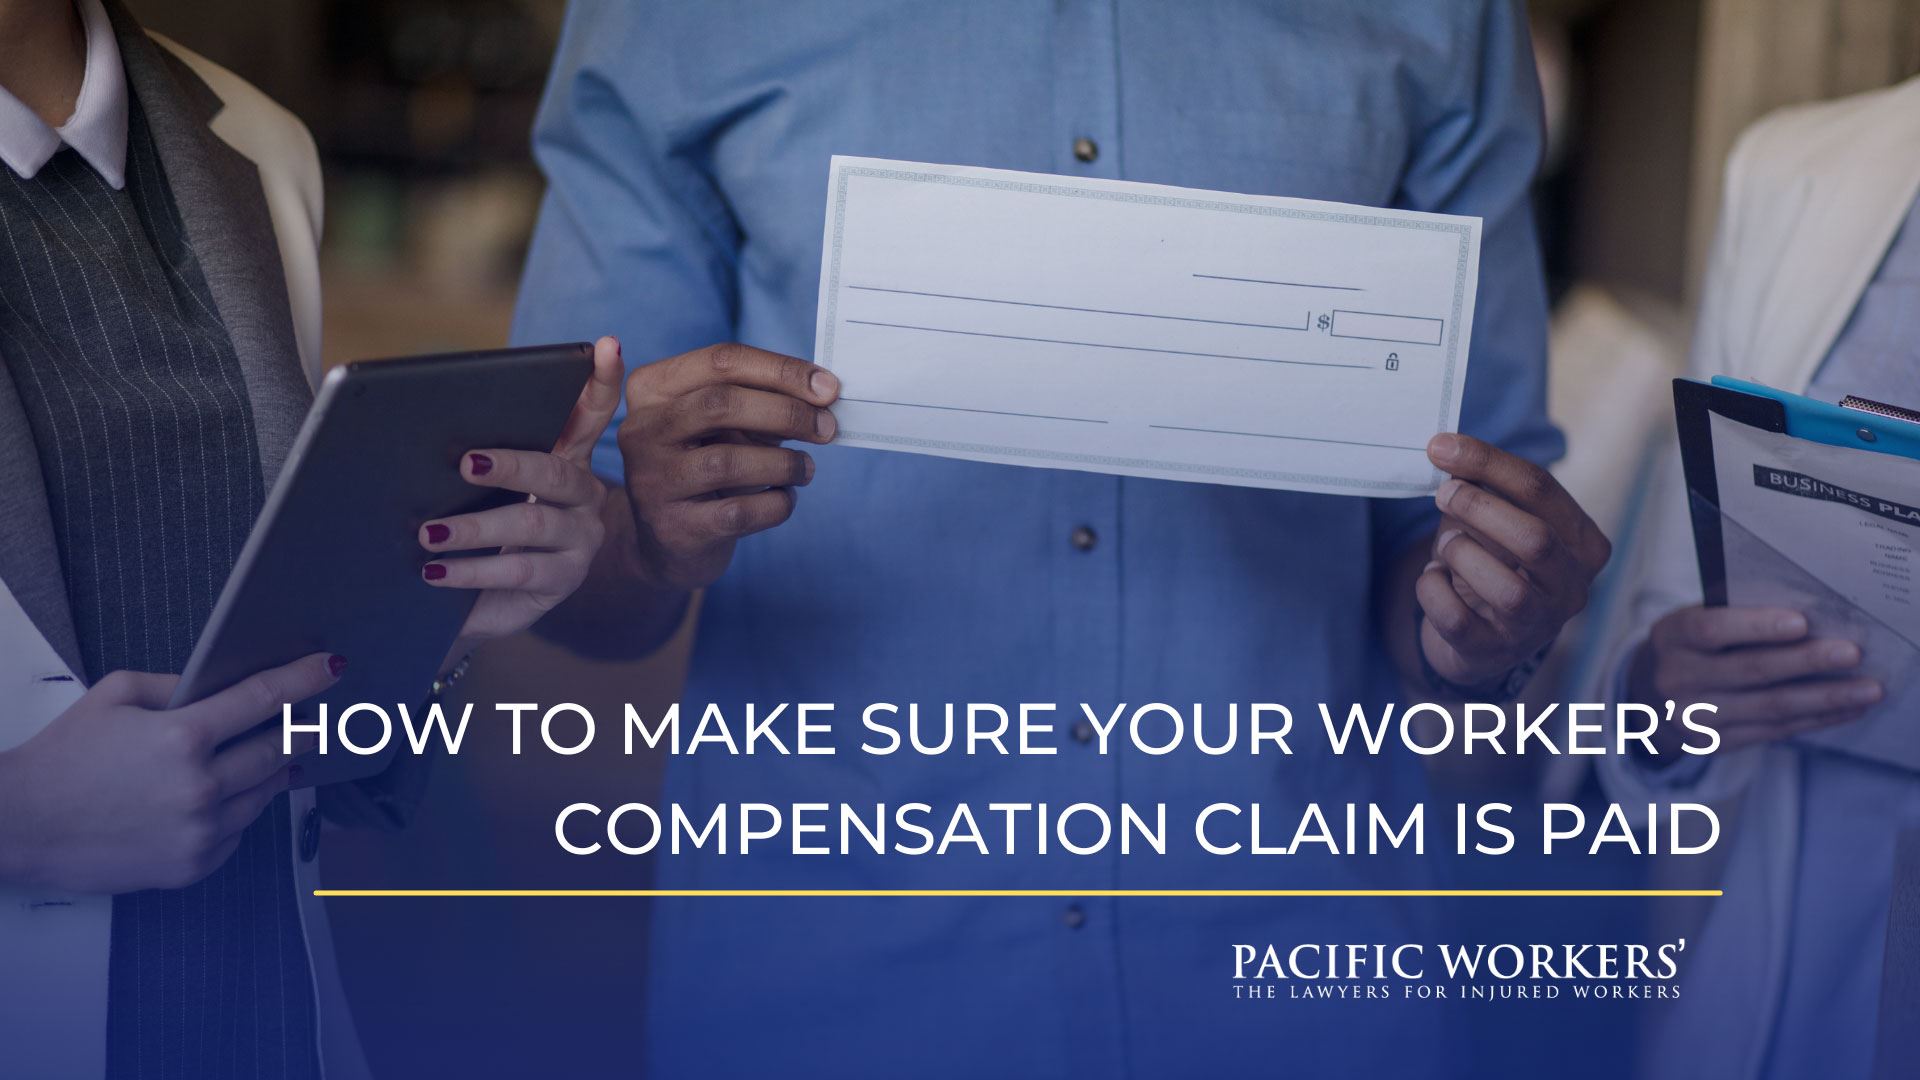 How to Make Sure Your Worker’s Compensation Claim Is Paid